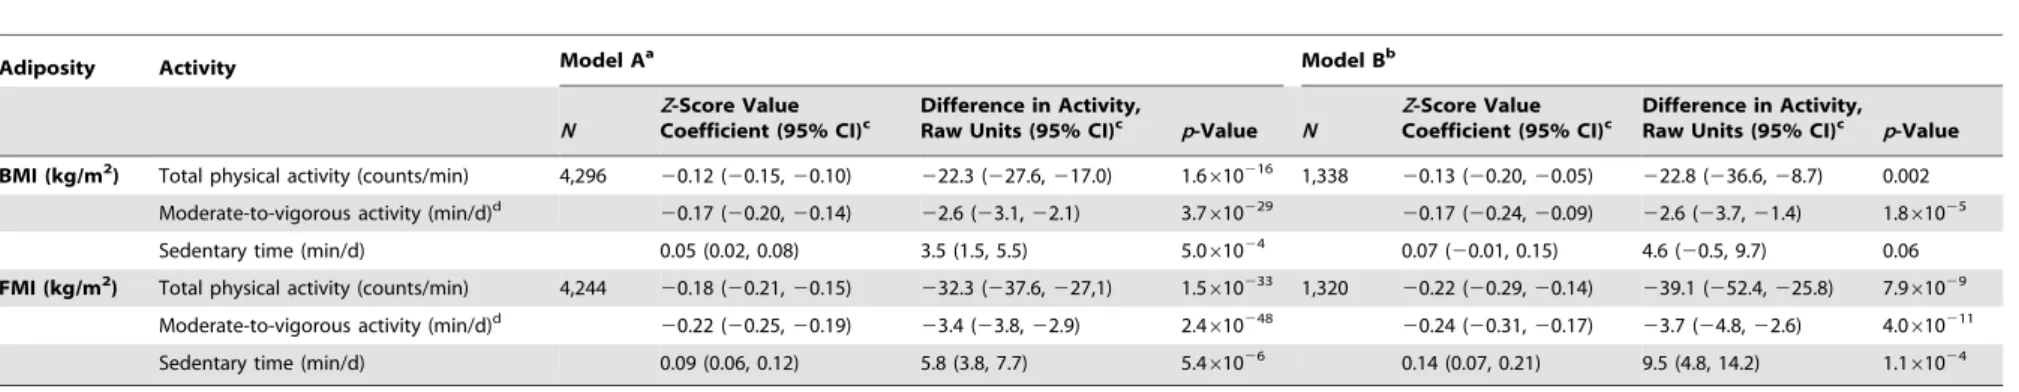 Table 2. Associations between measures of adiposity and physical activity levels.